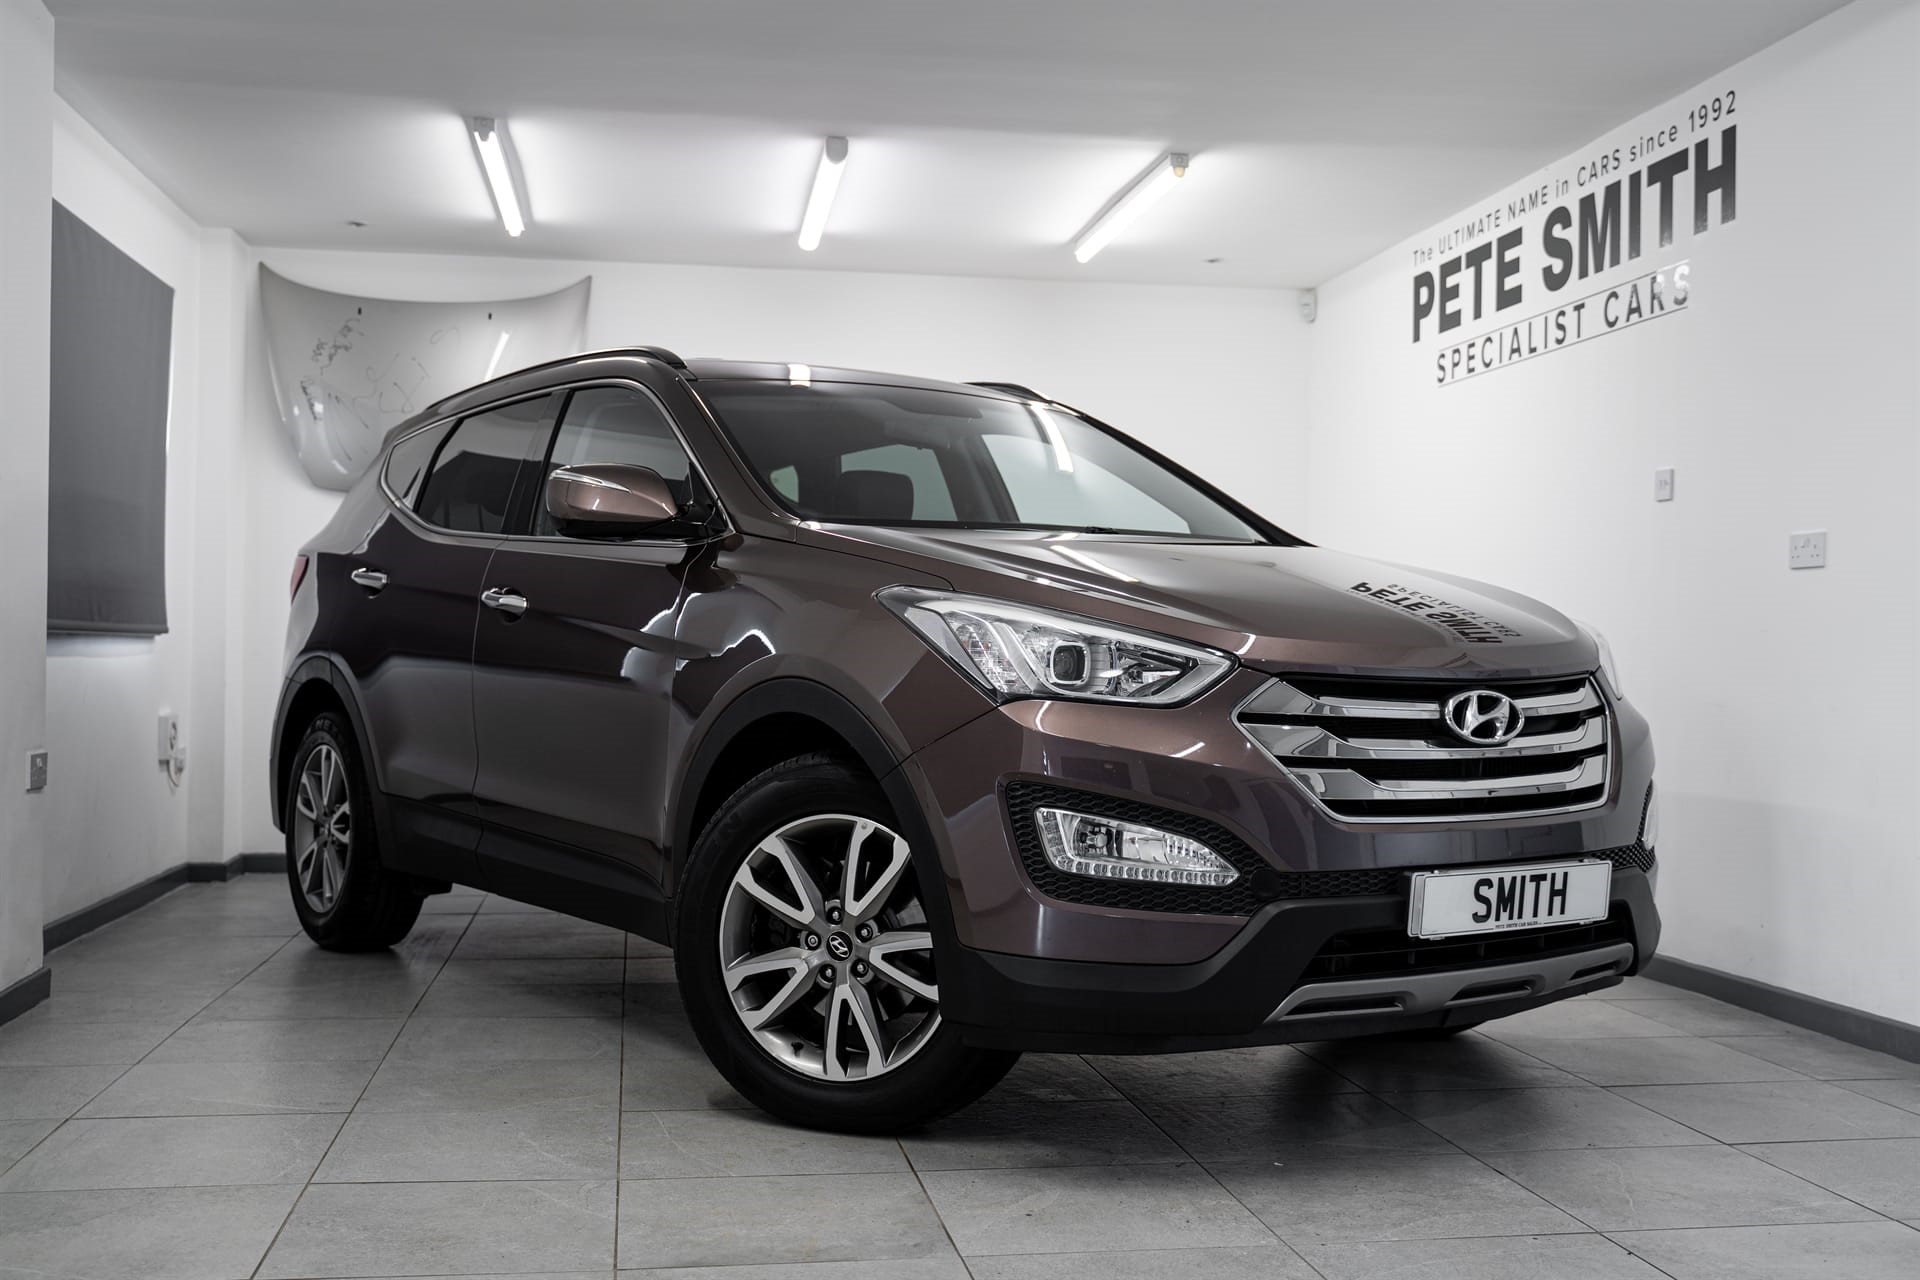 Used Hyundai Santa Fe for sale in Coleford, Gloucestershire | Pete Smith